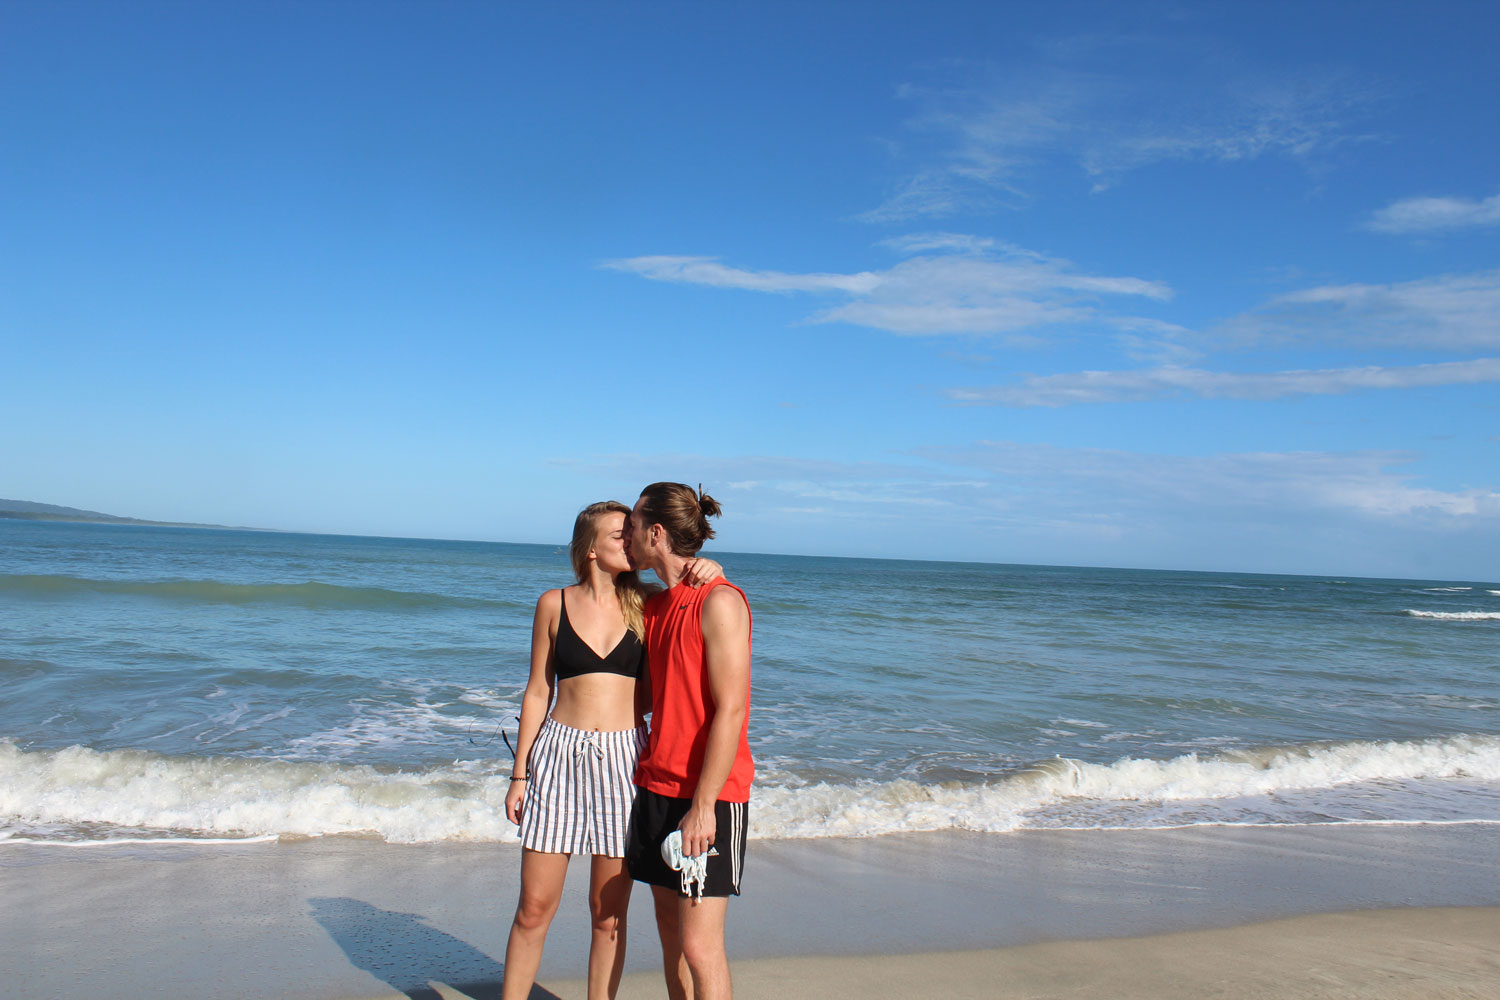 Us on the beach in Costa Rica